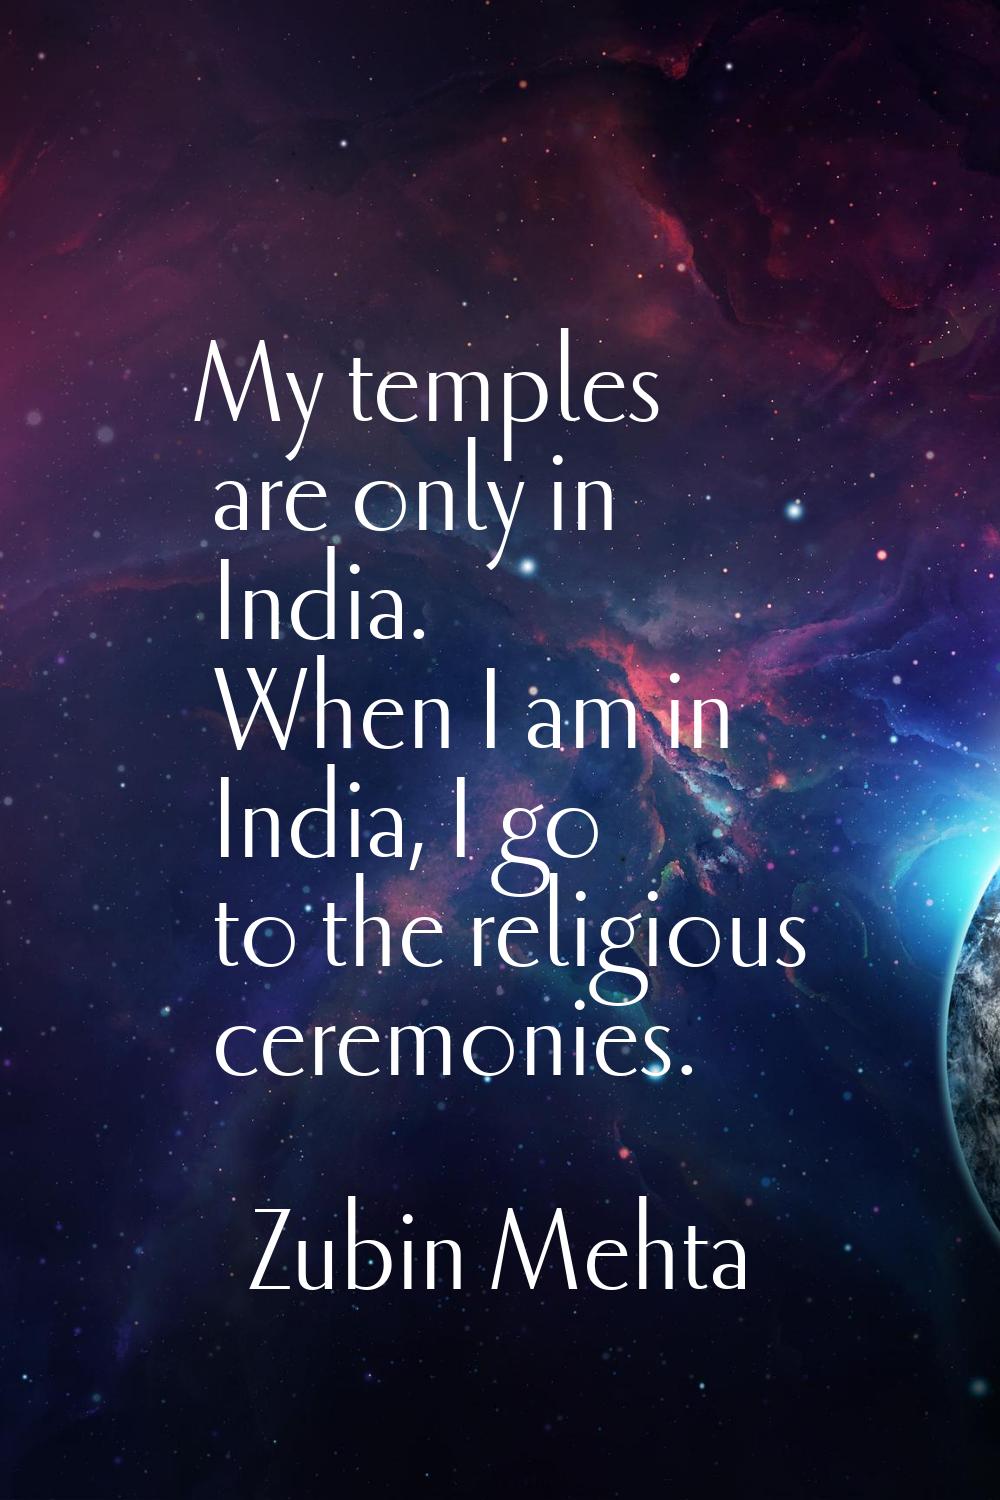 My temples are only in India. When I am in India, I go to the religious ceremonies.